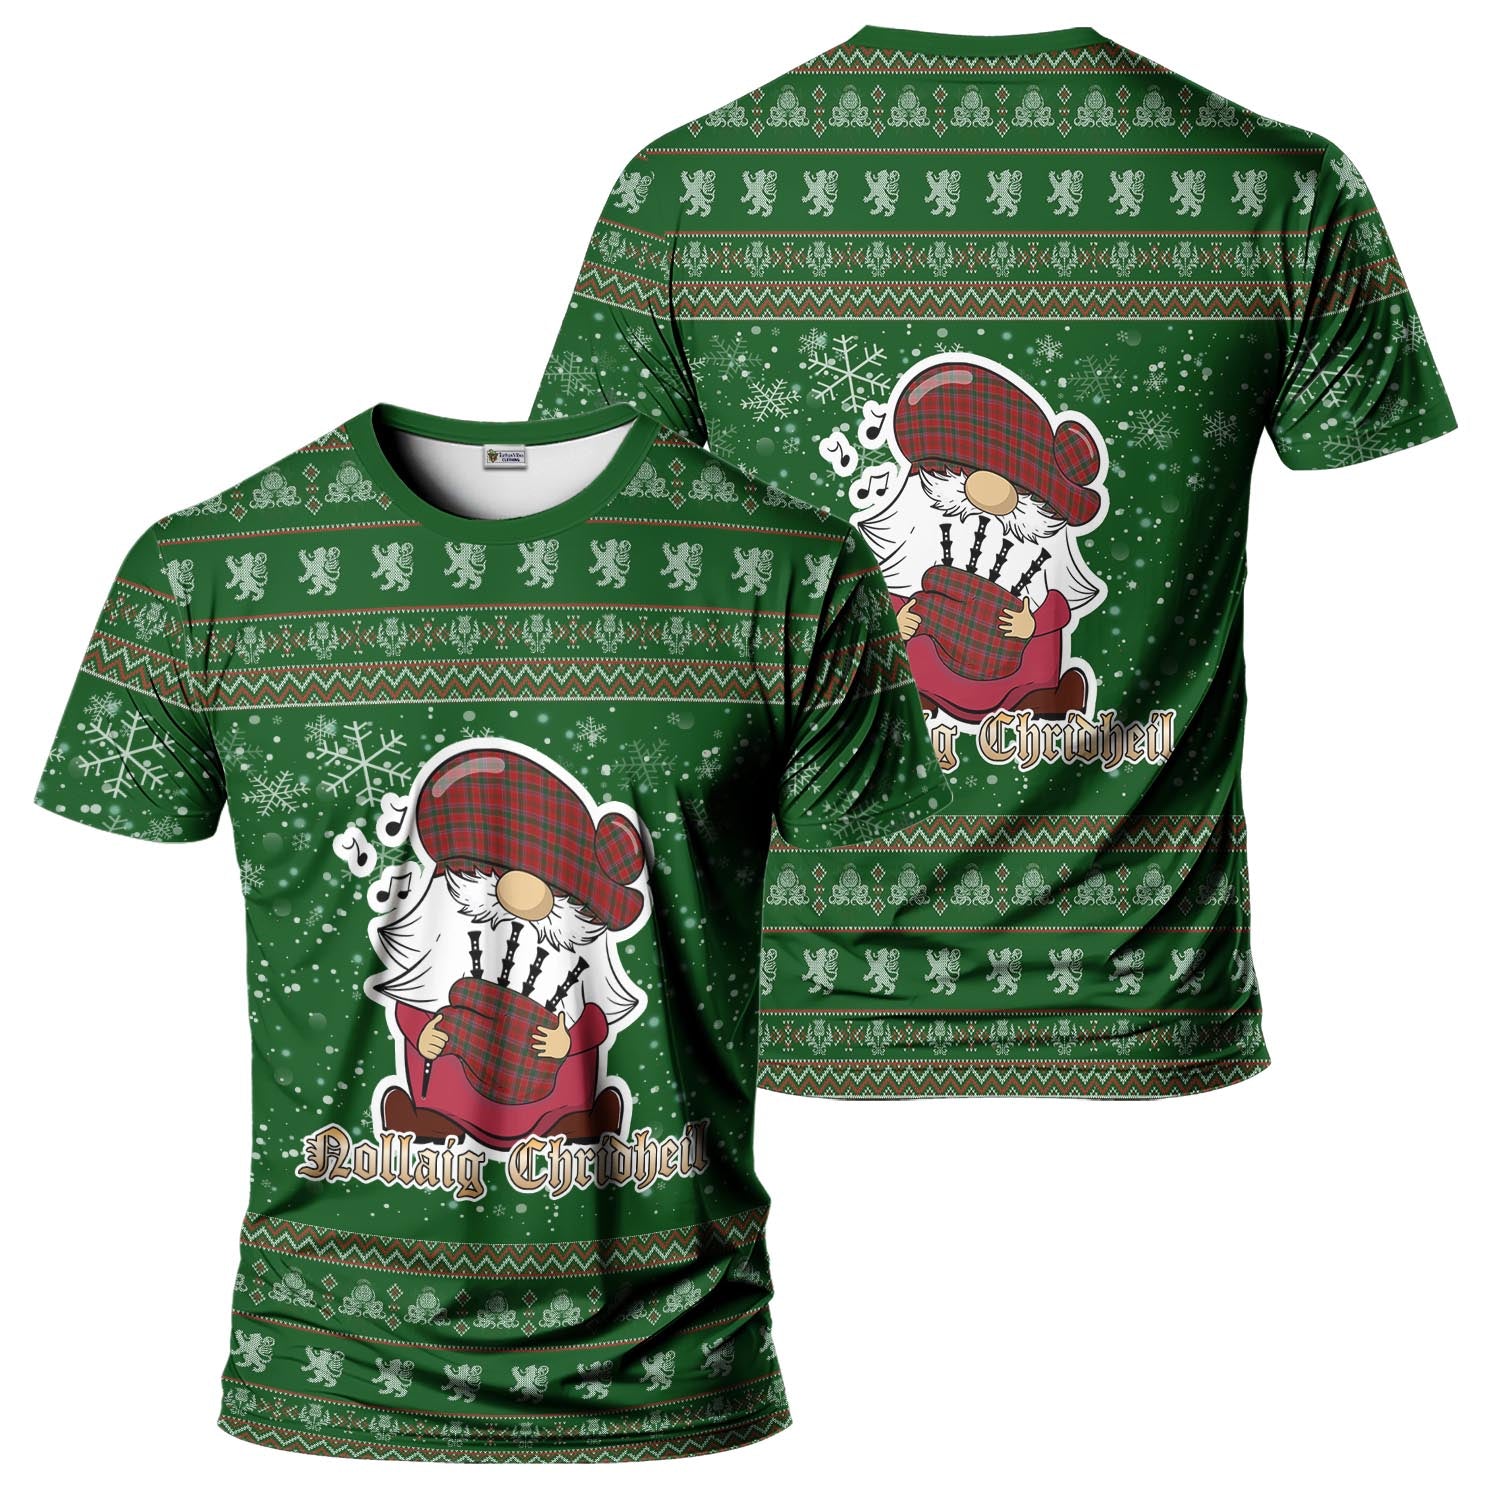 Dalzell (Dalziel) Clan Christmas Family T-Shirt with Funny Gnome Playing Bagpipes Men's Shirt Green - Tartanvibesclothing